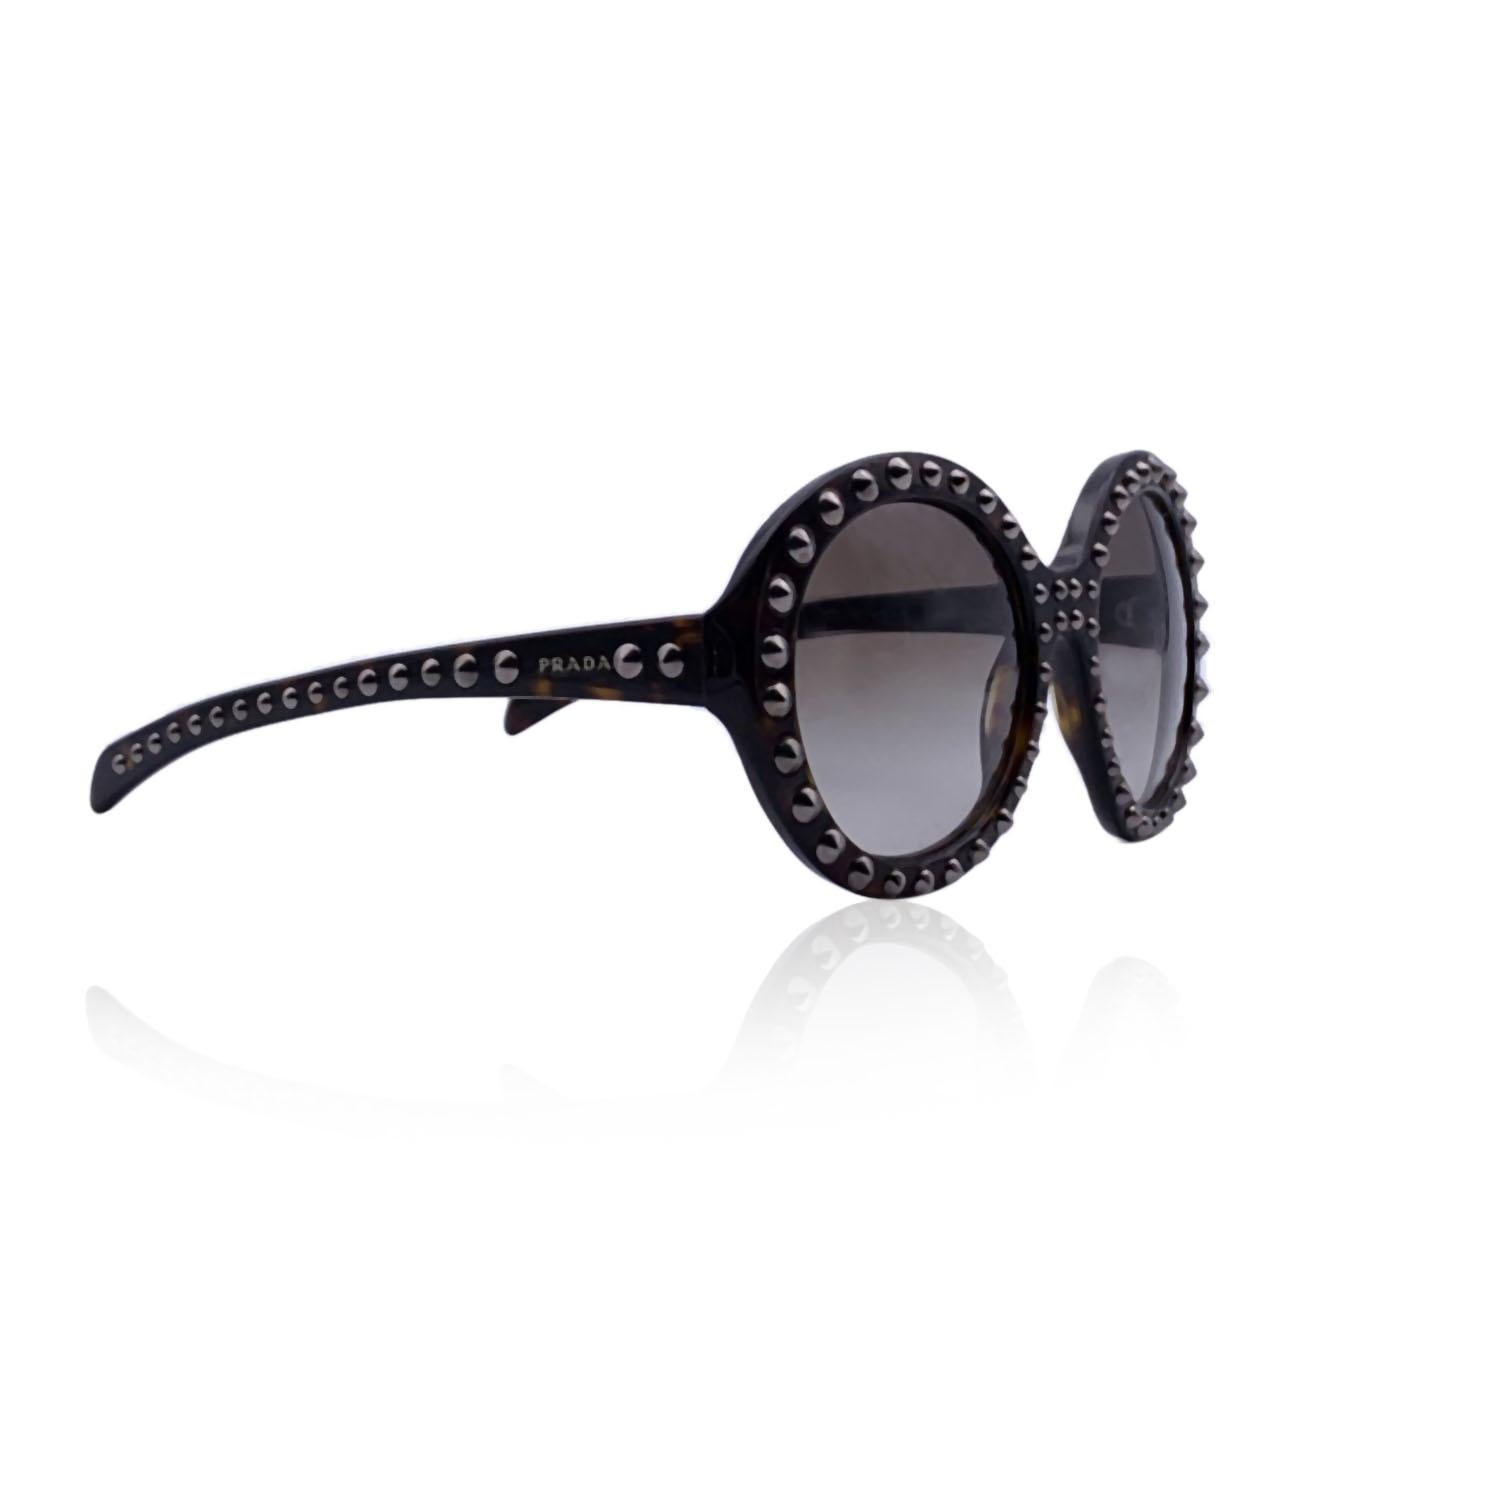 Stunning sunglasses by Prada, mod. SPR 29Q col.2AU-0A7. Round oversized shape in dark brown acetate embellished with silver metal studs. Logo on the temples and gradient gray lenses. Mod & refs.: mod. SPR 29Q - ol.2AU-0A7 - 56/21 - 140. Made in